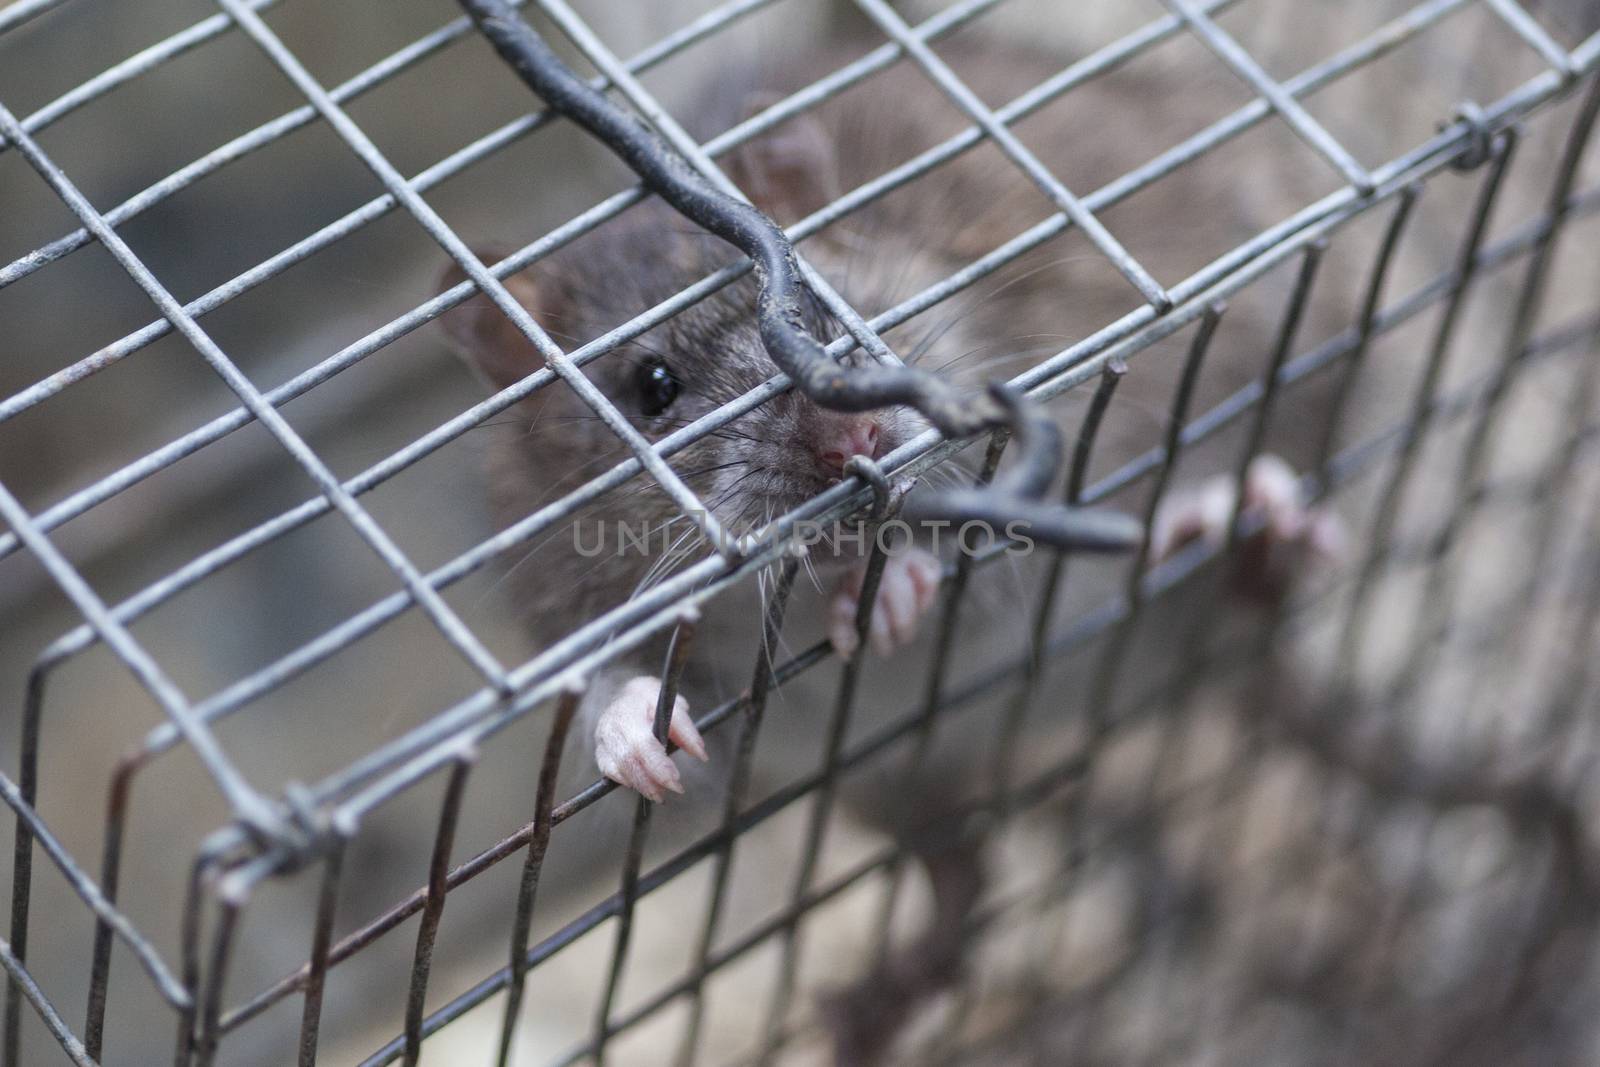 Rat in a cage #3 by pippocarlot